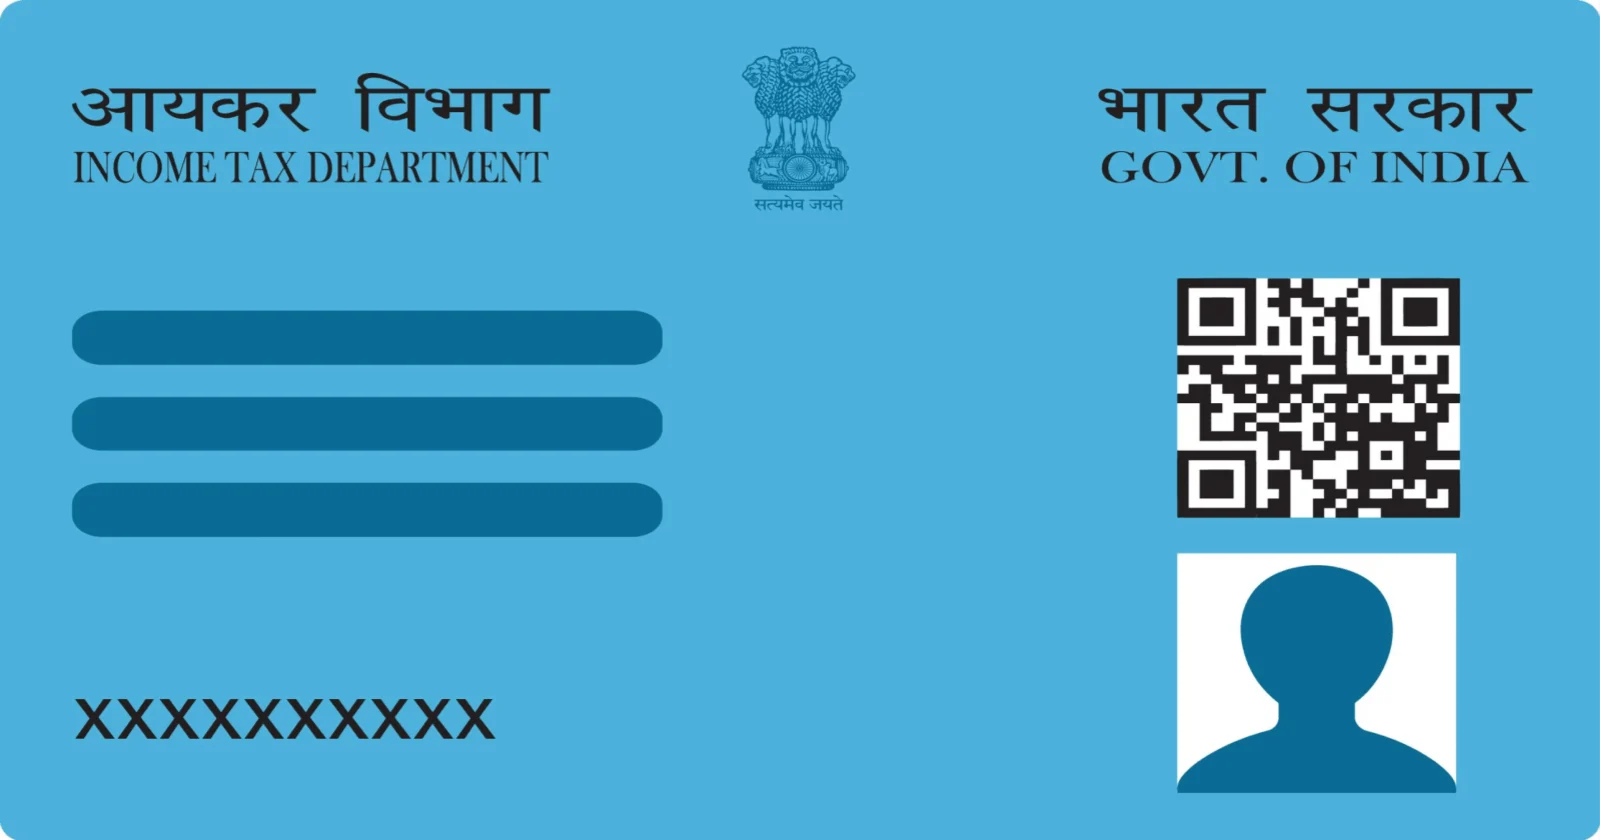 PAN Card - Permanent Account Number in India